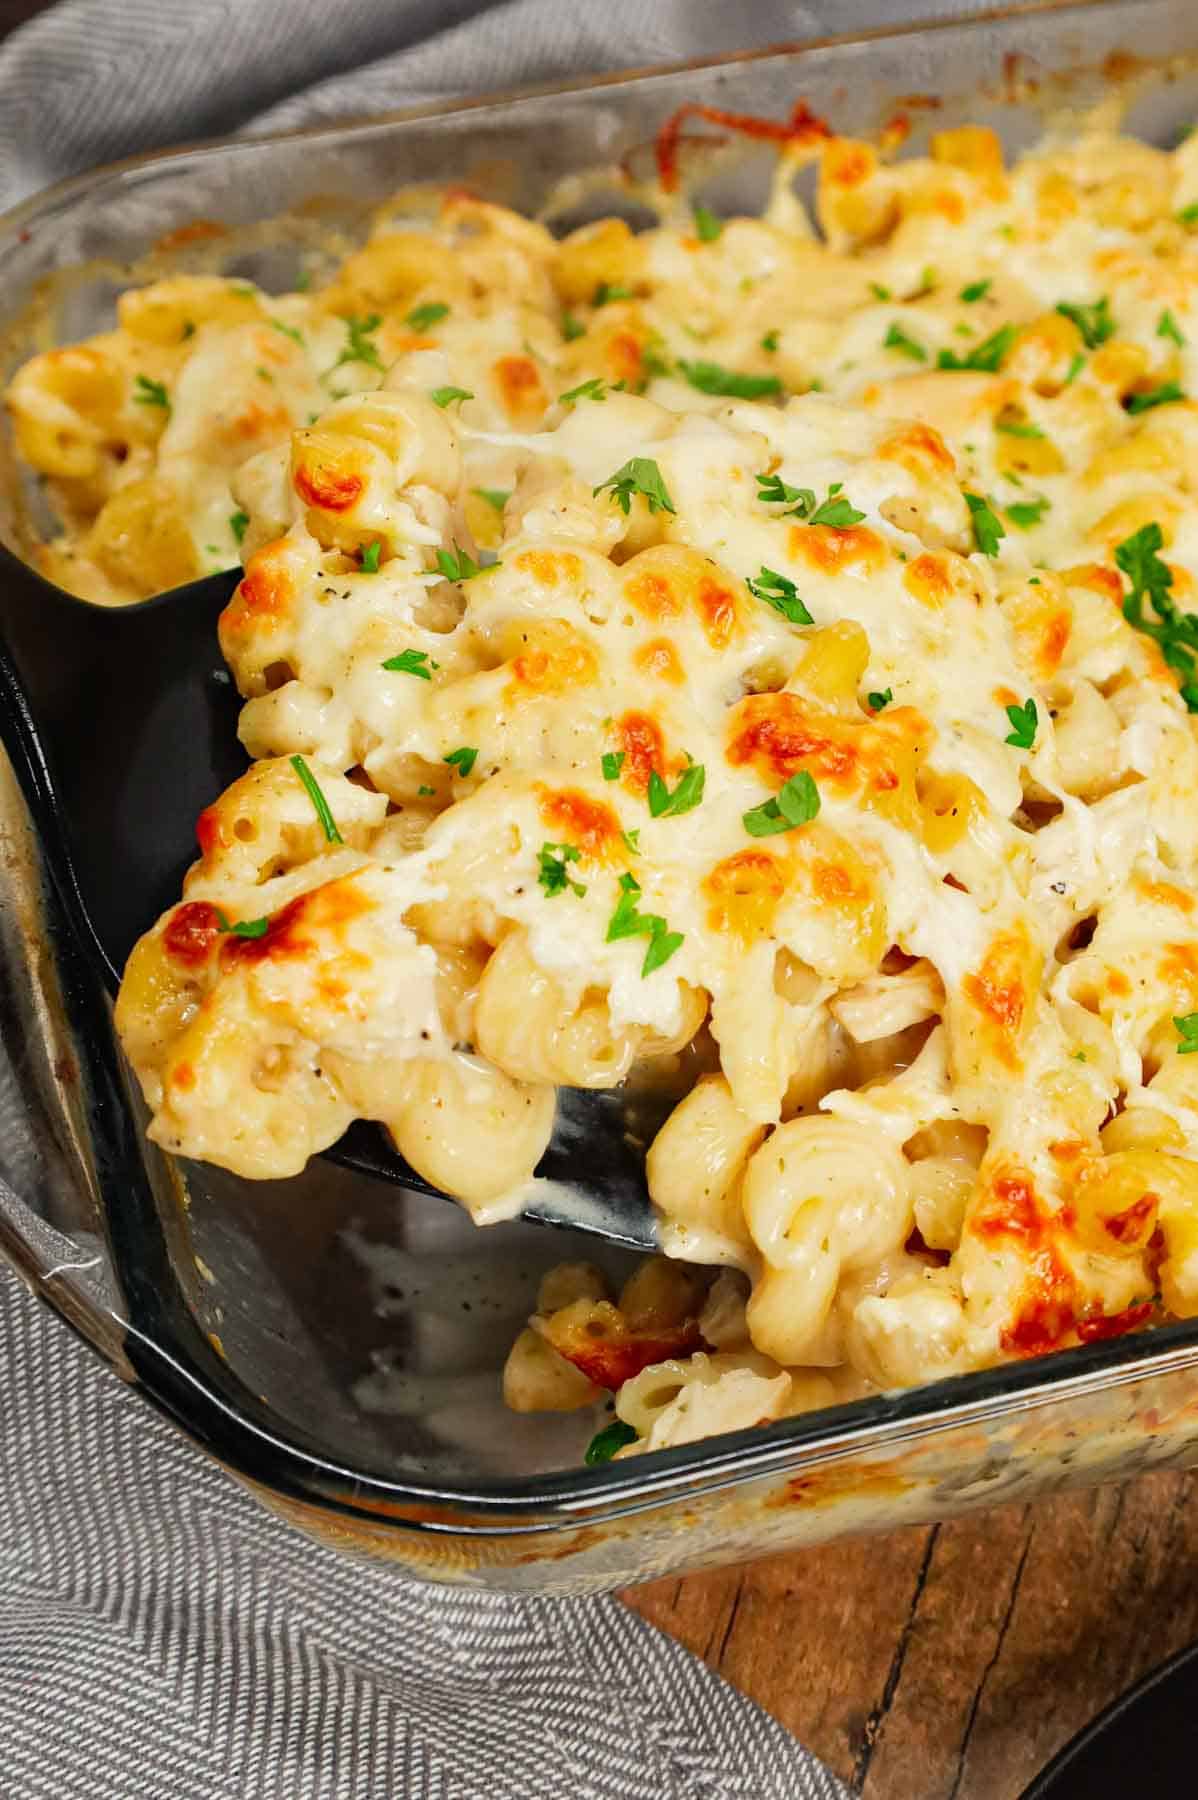 Dump and Bake Chicken Alfredo is an easy one dish meal made with cavatappi pasta, jarred alfredo sauce, condensed cream of bacon soup, chicken broth, chopped rotisserie chicken and mozzarella cheese.